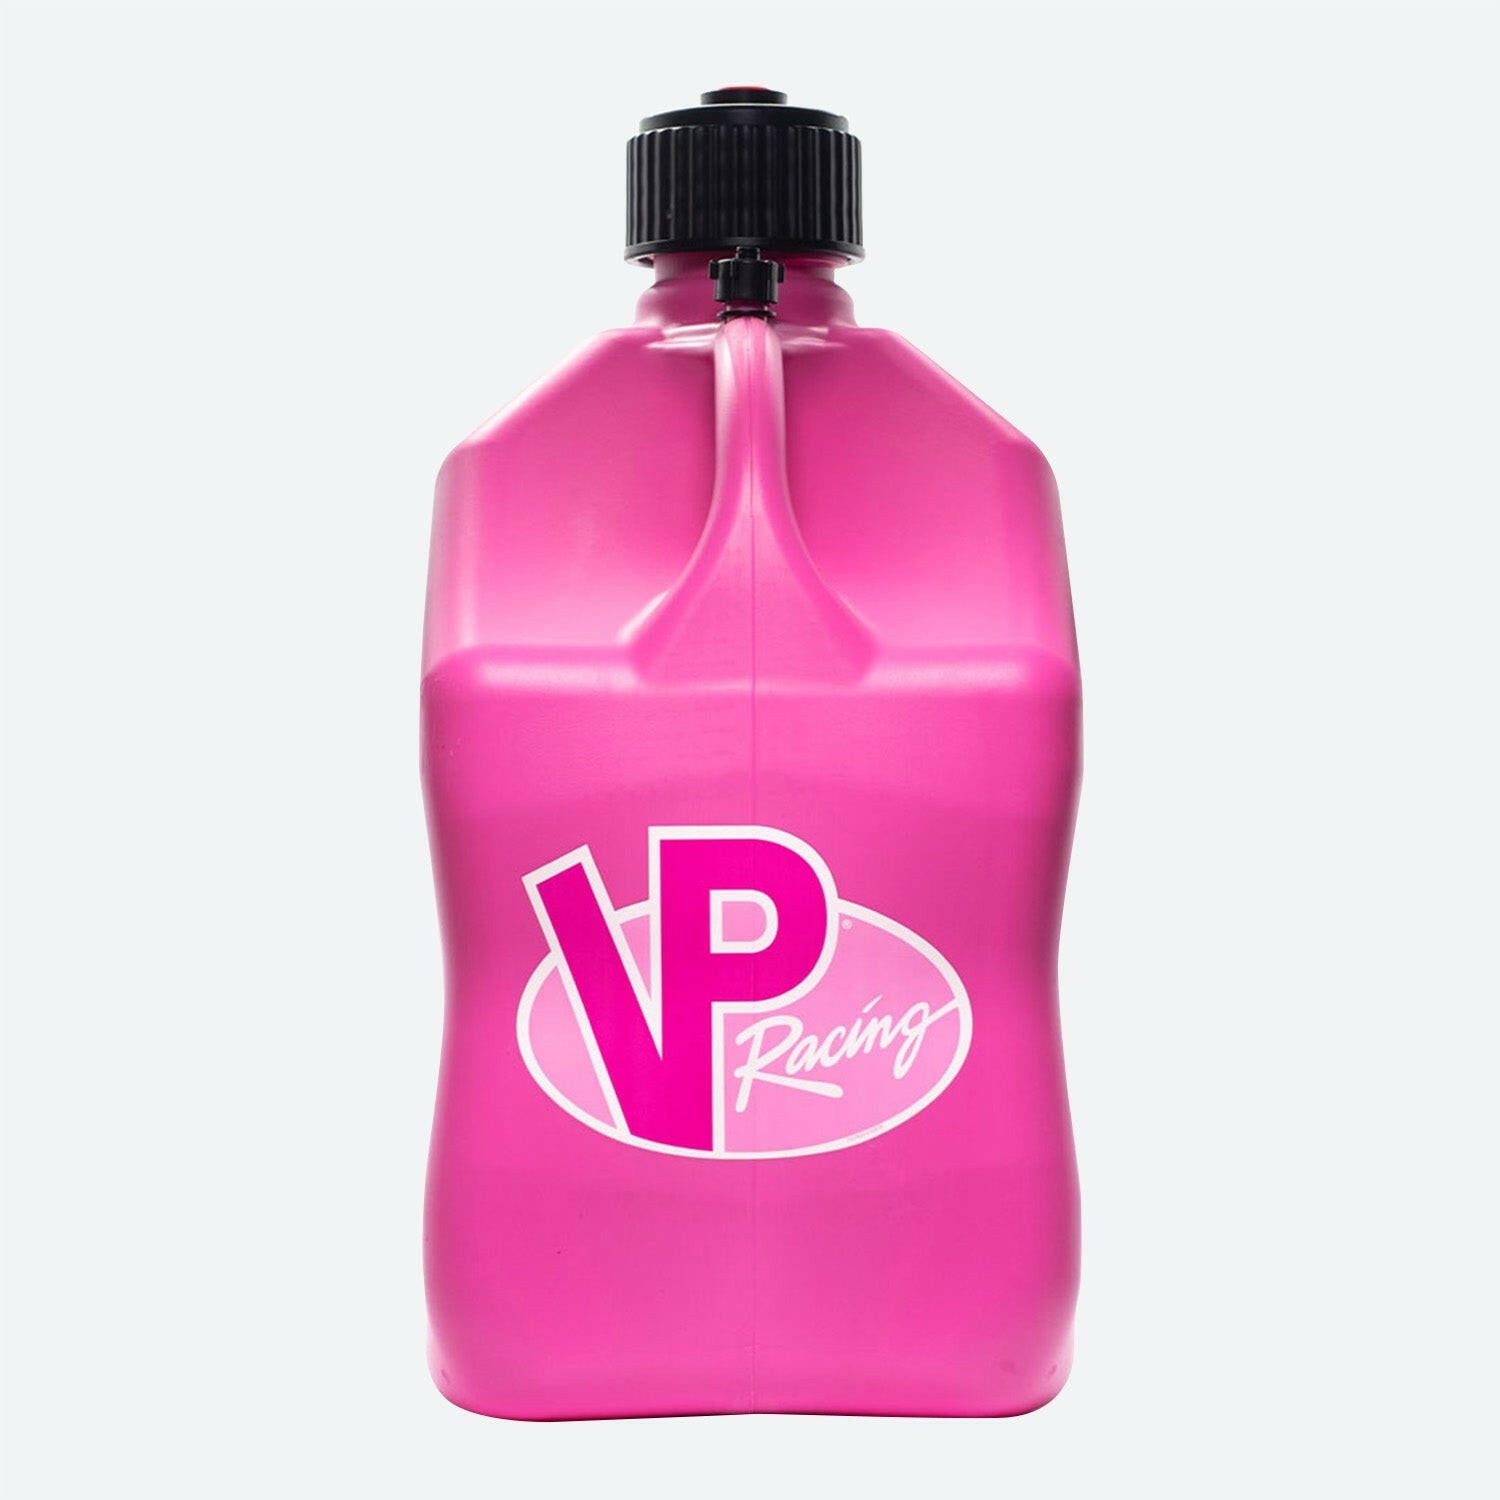 A pink 5.5-Gallon Motorsport Container® - Square. The utility jug features a pink VP Racing logo on the front